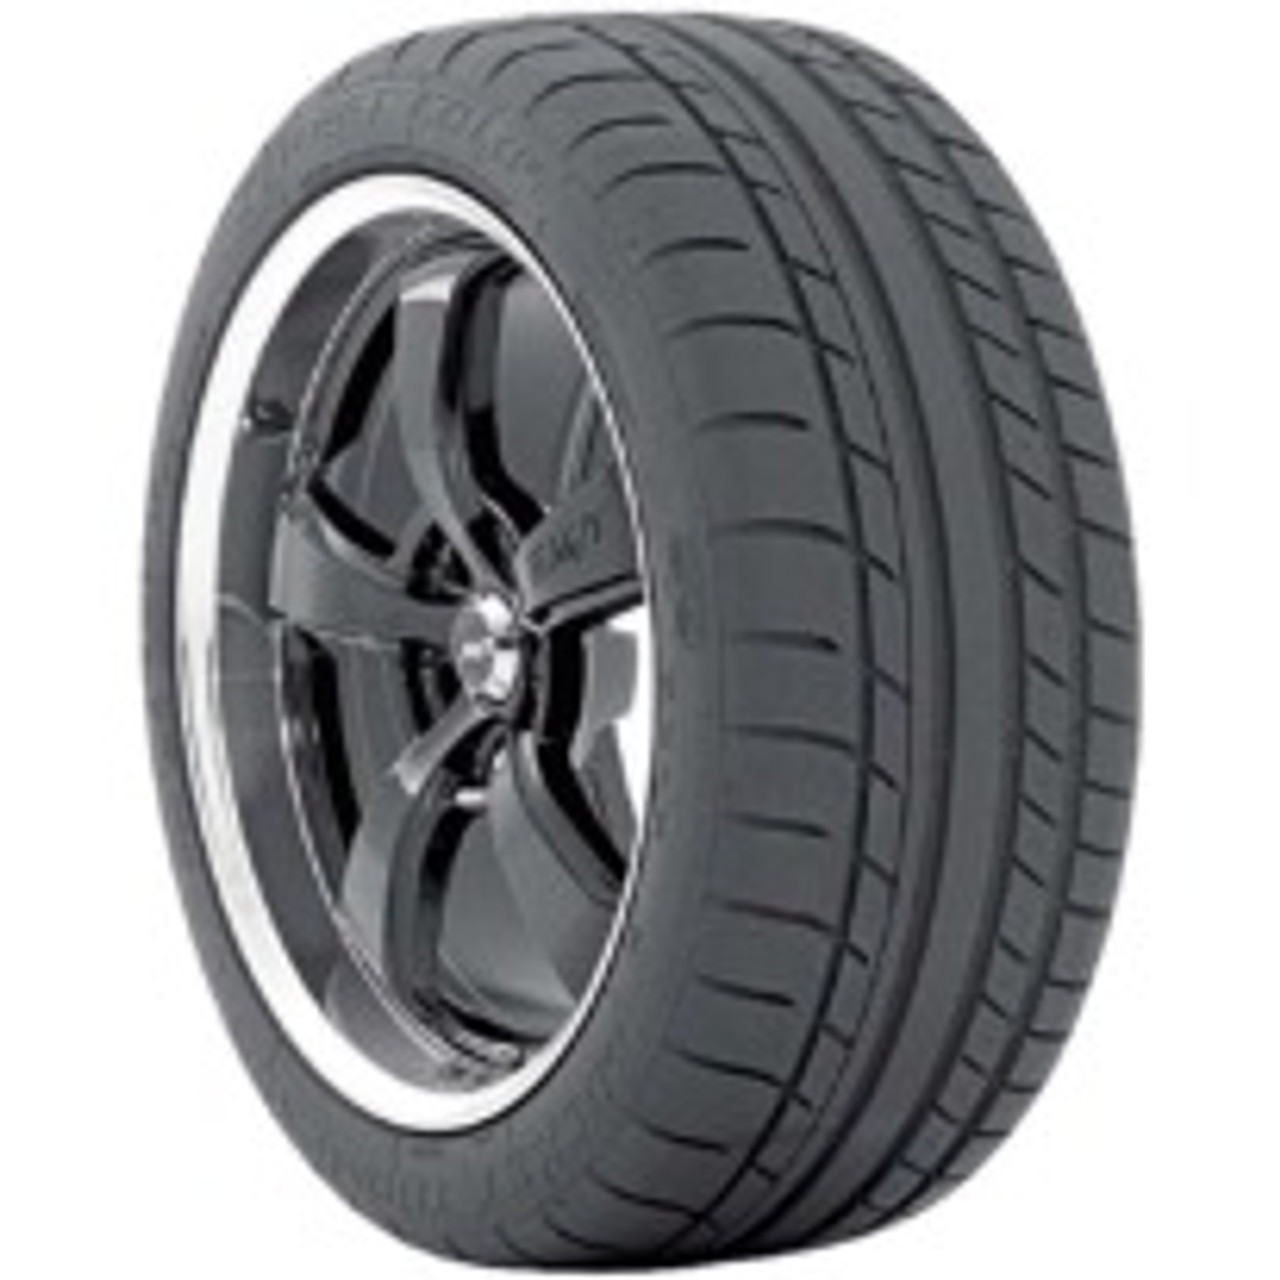 MIC248818, Tire, Street Comp, 245 / 40R-18, Radial, Y Speed Rated, 1609 lb Max Load, Black Sidewall, Each